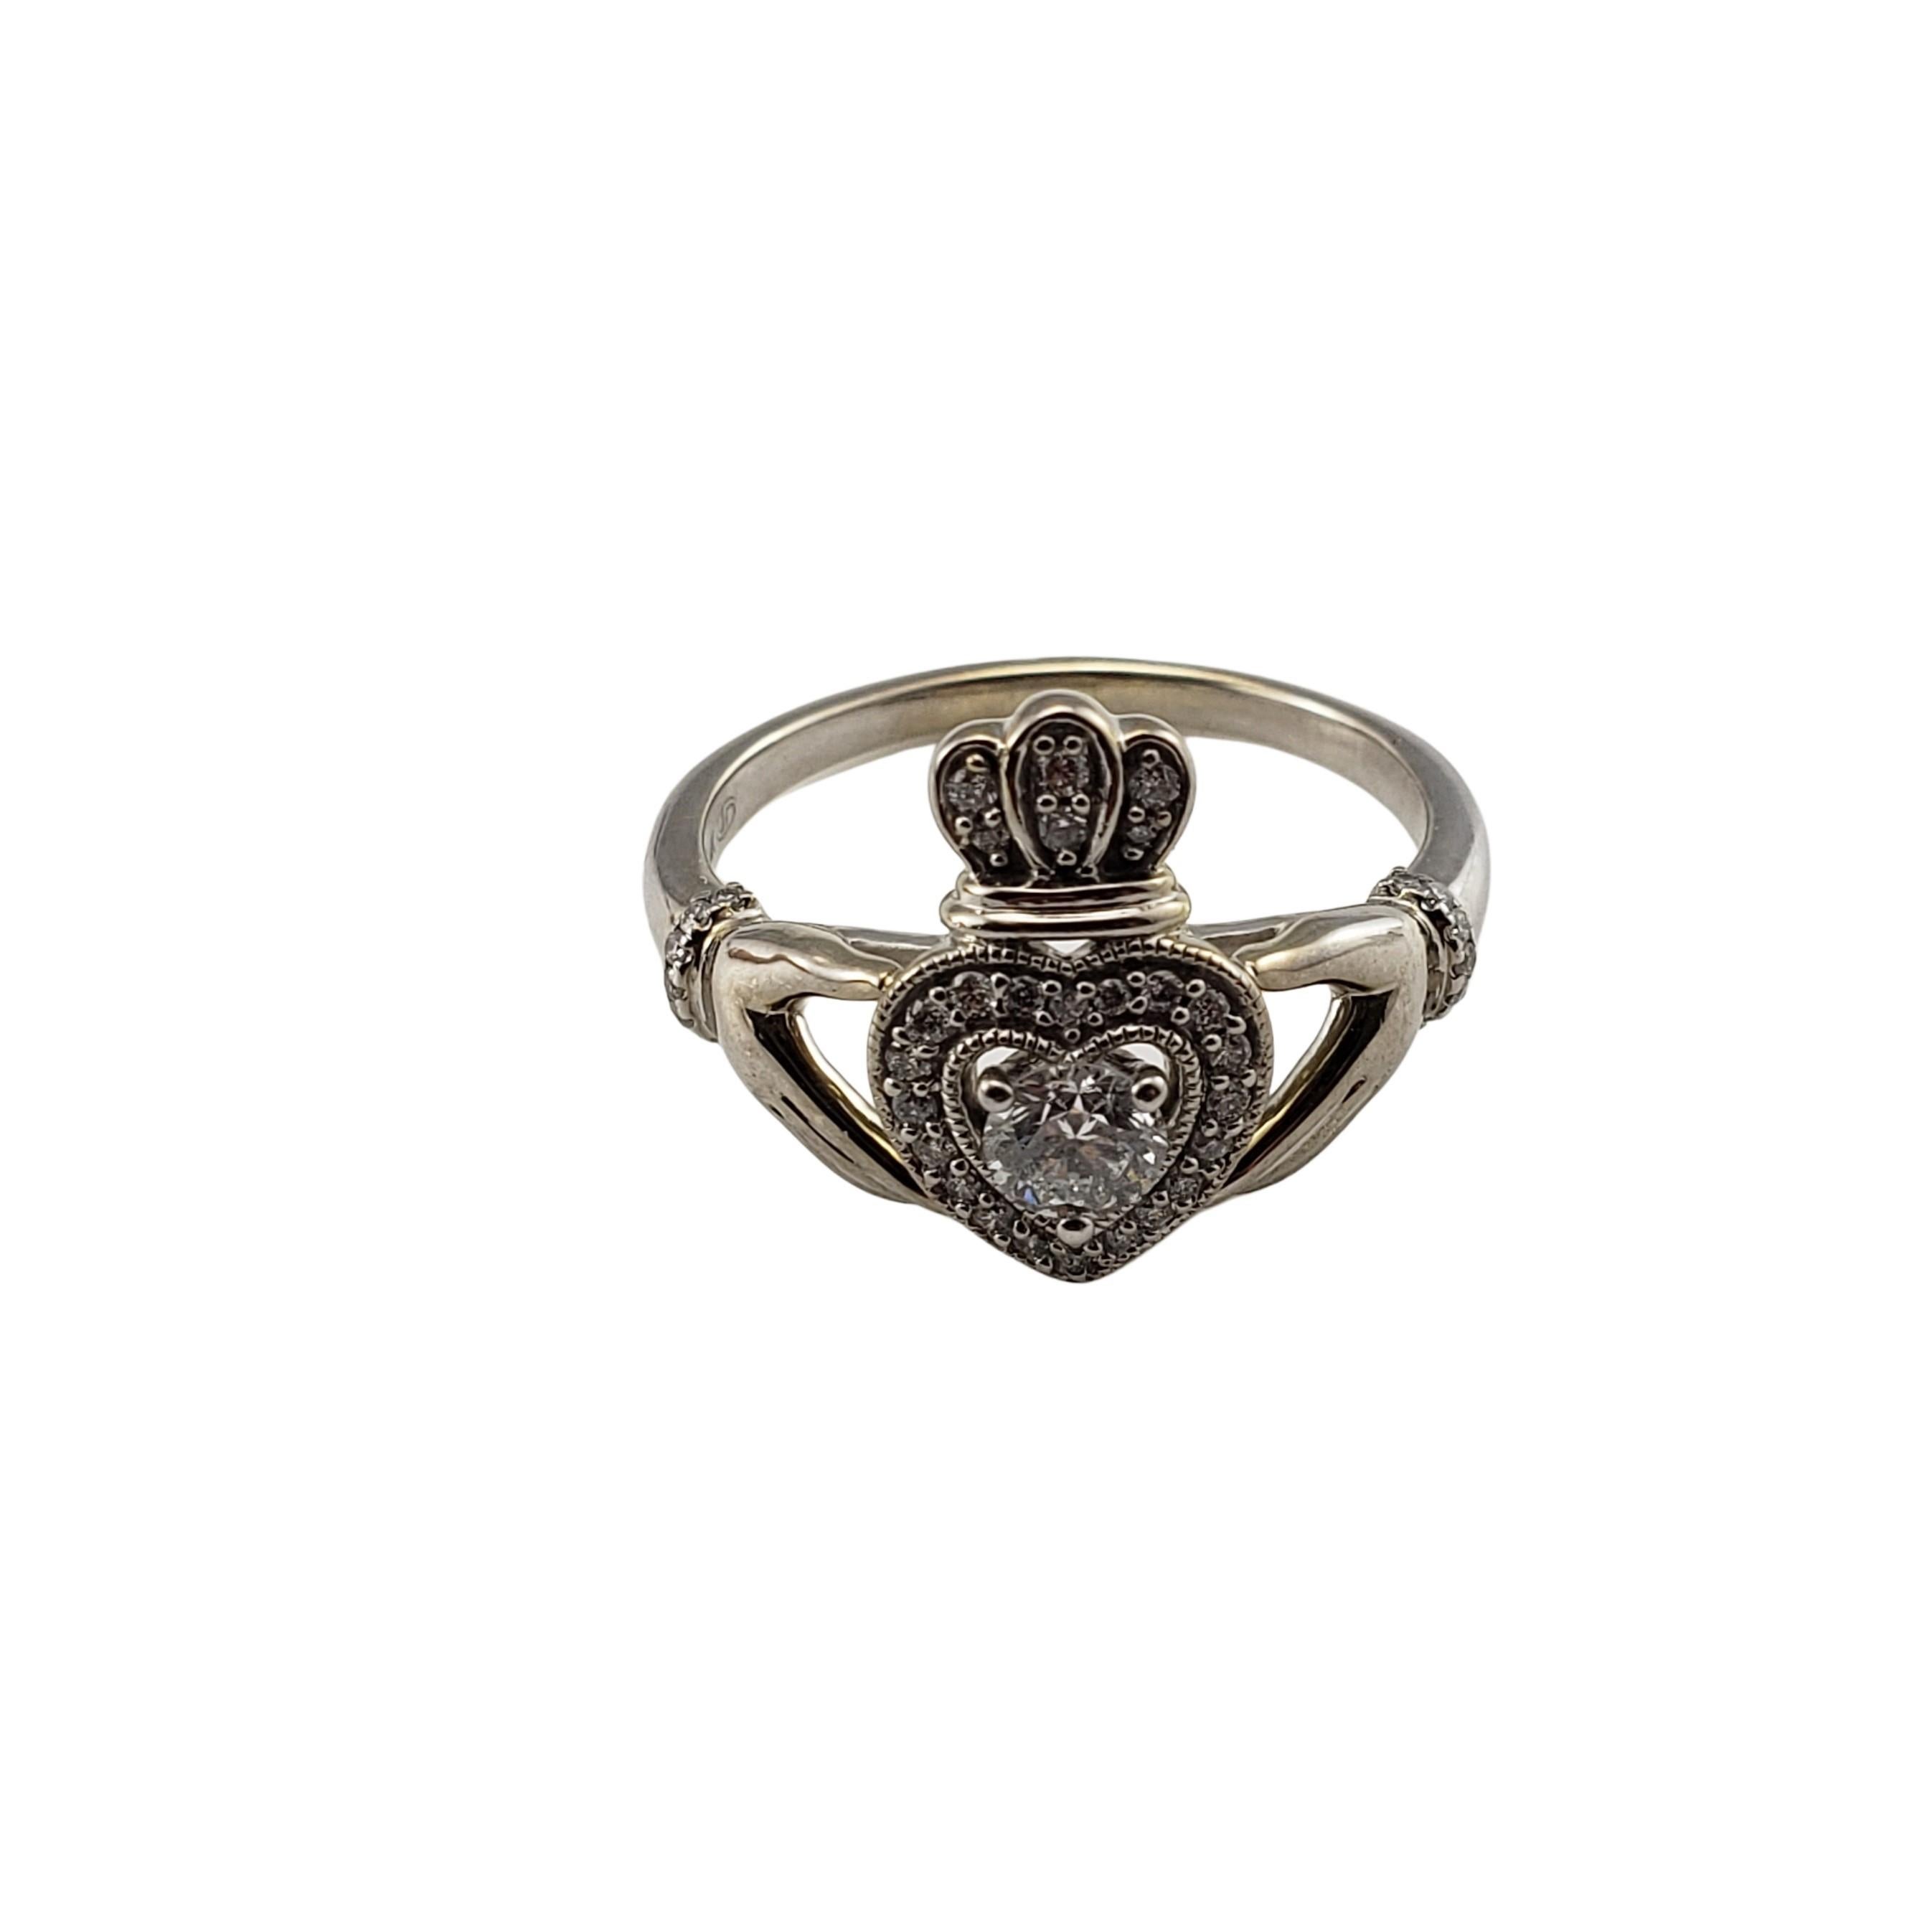 Vintage 14 Karat White Gold and Diamond Claddagh Ring Size 6.75-

This lovely Claddagh ring features 41 round brilliant cut diamonds (center: .20 ct.) set in classic 14K white gold.  Shank: 2 mm.

Approximate total diamond weight:  .45 ct.

Diamond